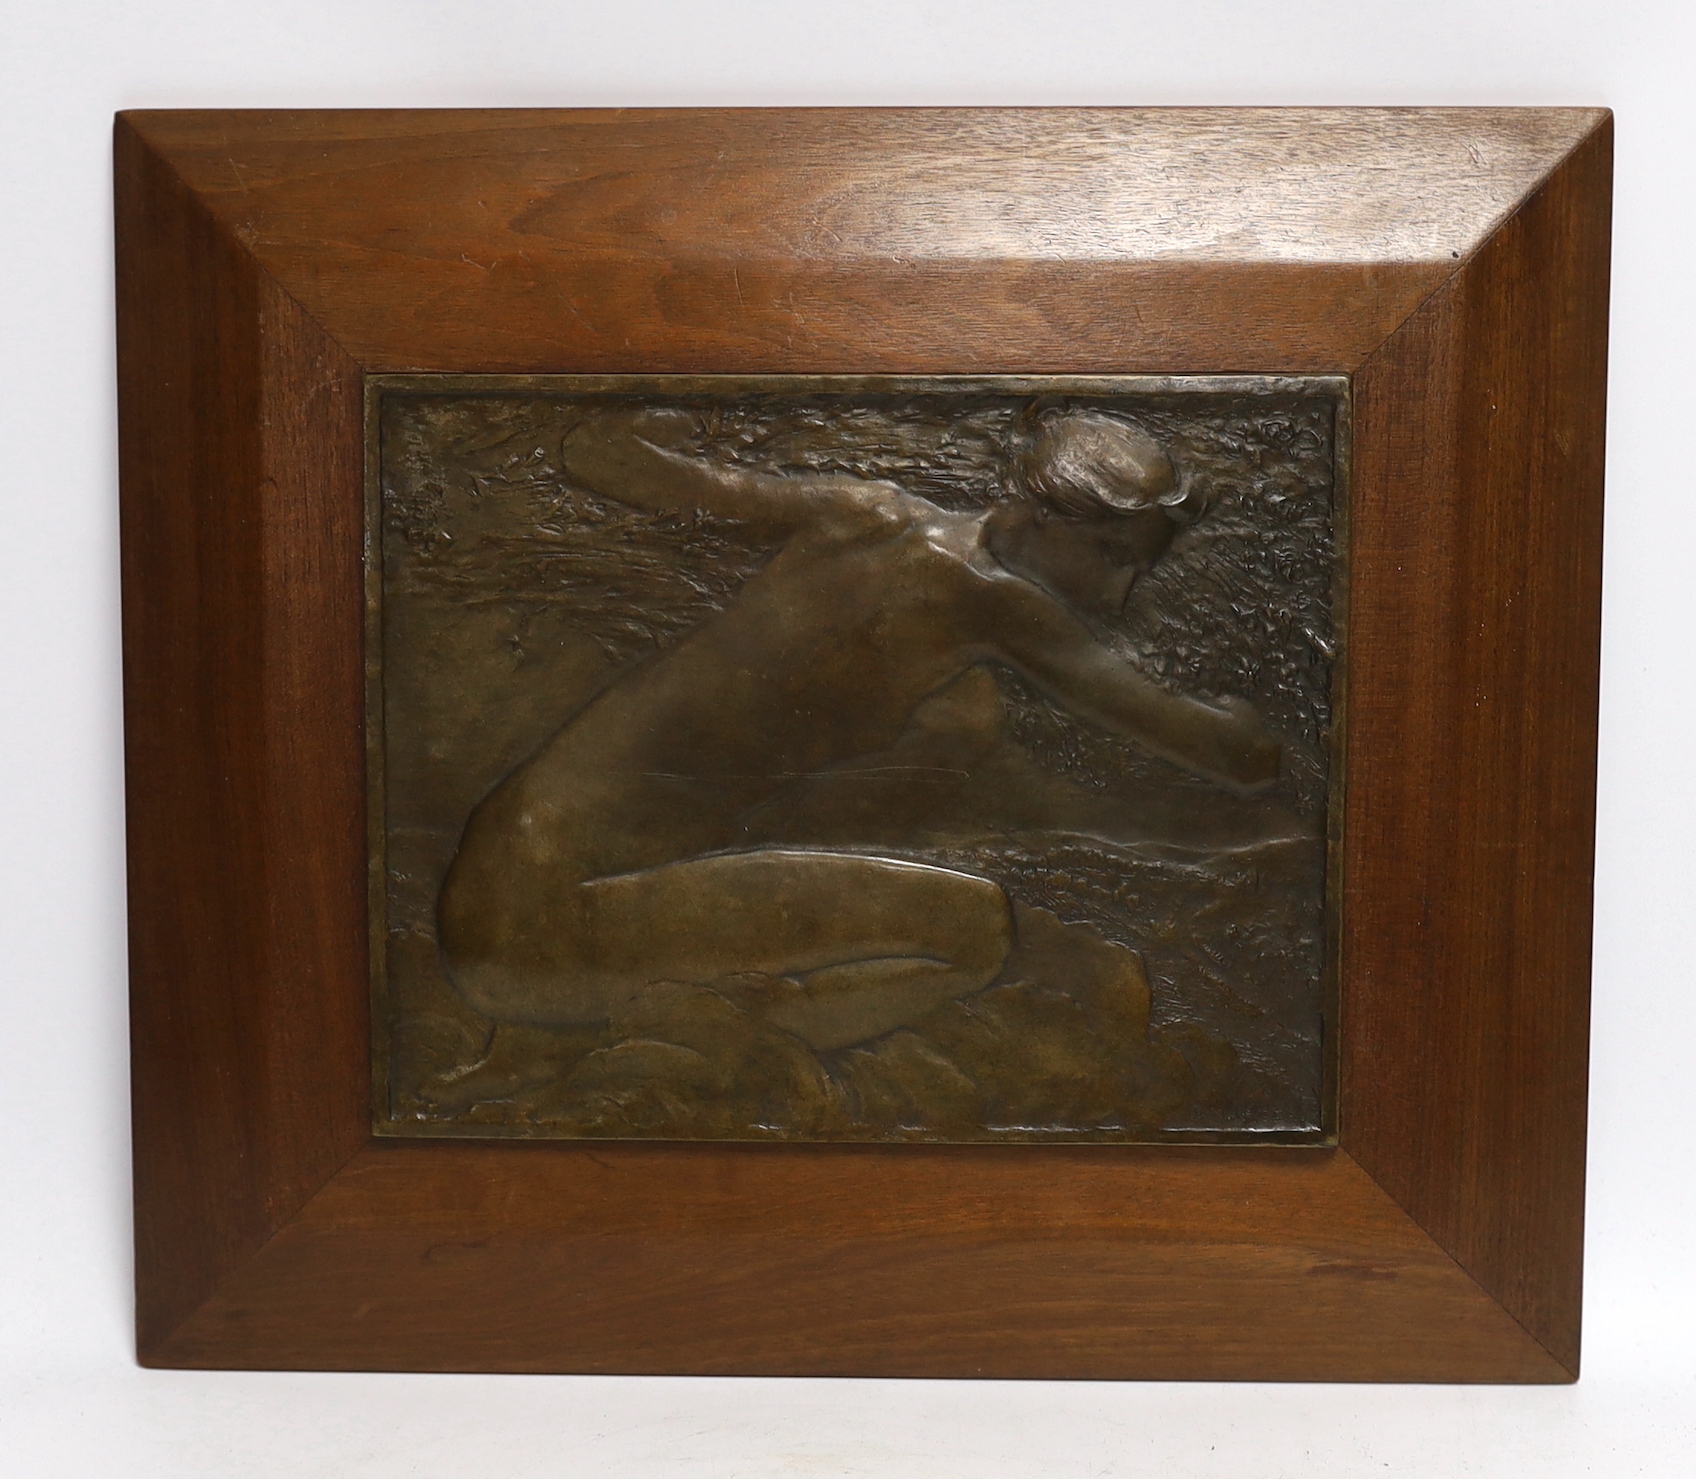 S. Marceau (20th. C), a bronze relief plaque, nude female, signed and limited edition 1/10, 32 x 37cm